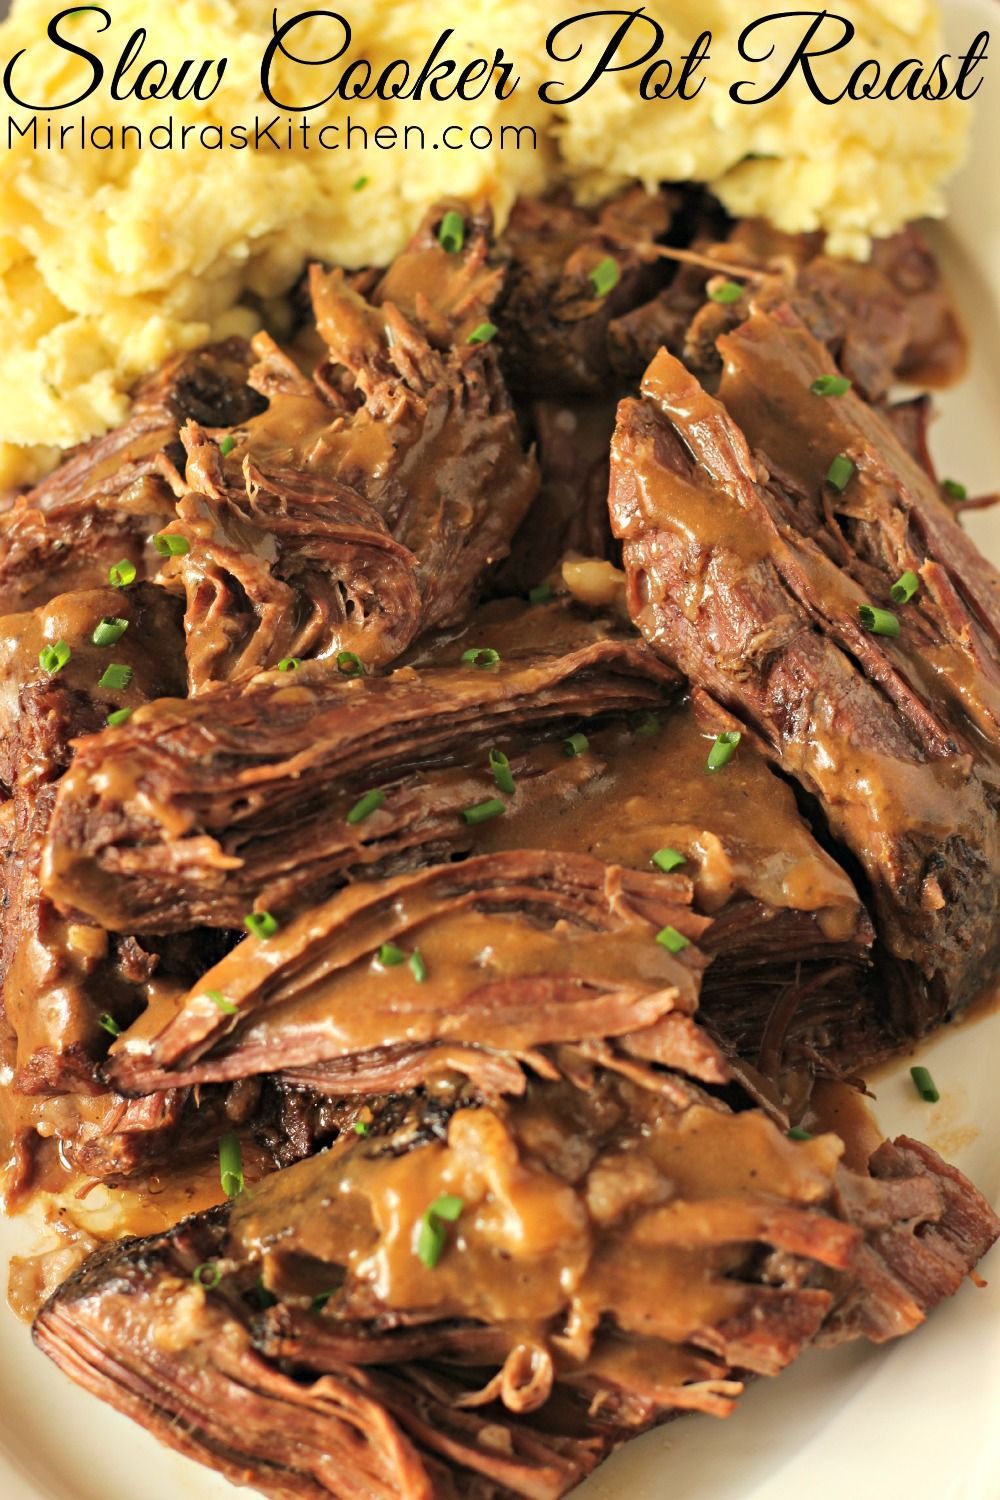 This Slow Cooker Pot Roast is the best pot roast I have ever made with any method! It takes just five minutes to get it in the